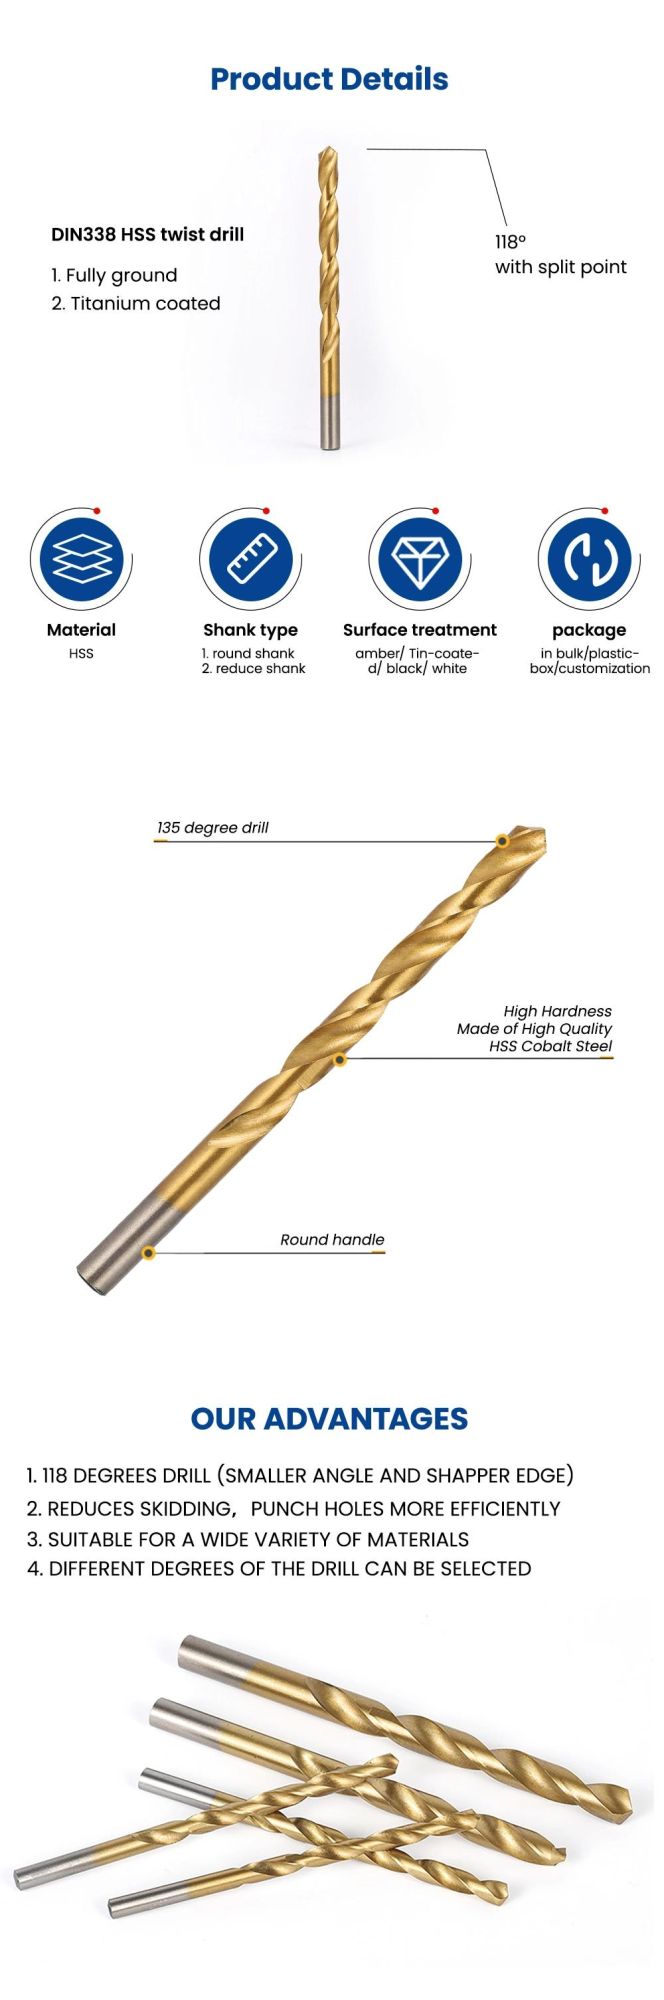 Pack of 12, 1/8-Inch Titanium Nitride Coated Drill Bit, High Speed Steel, Jobber Length, for Metal, Plastic, Wood